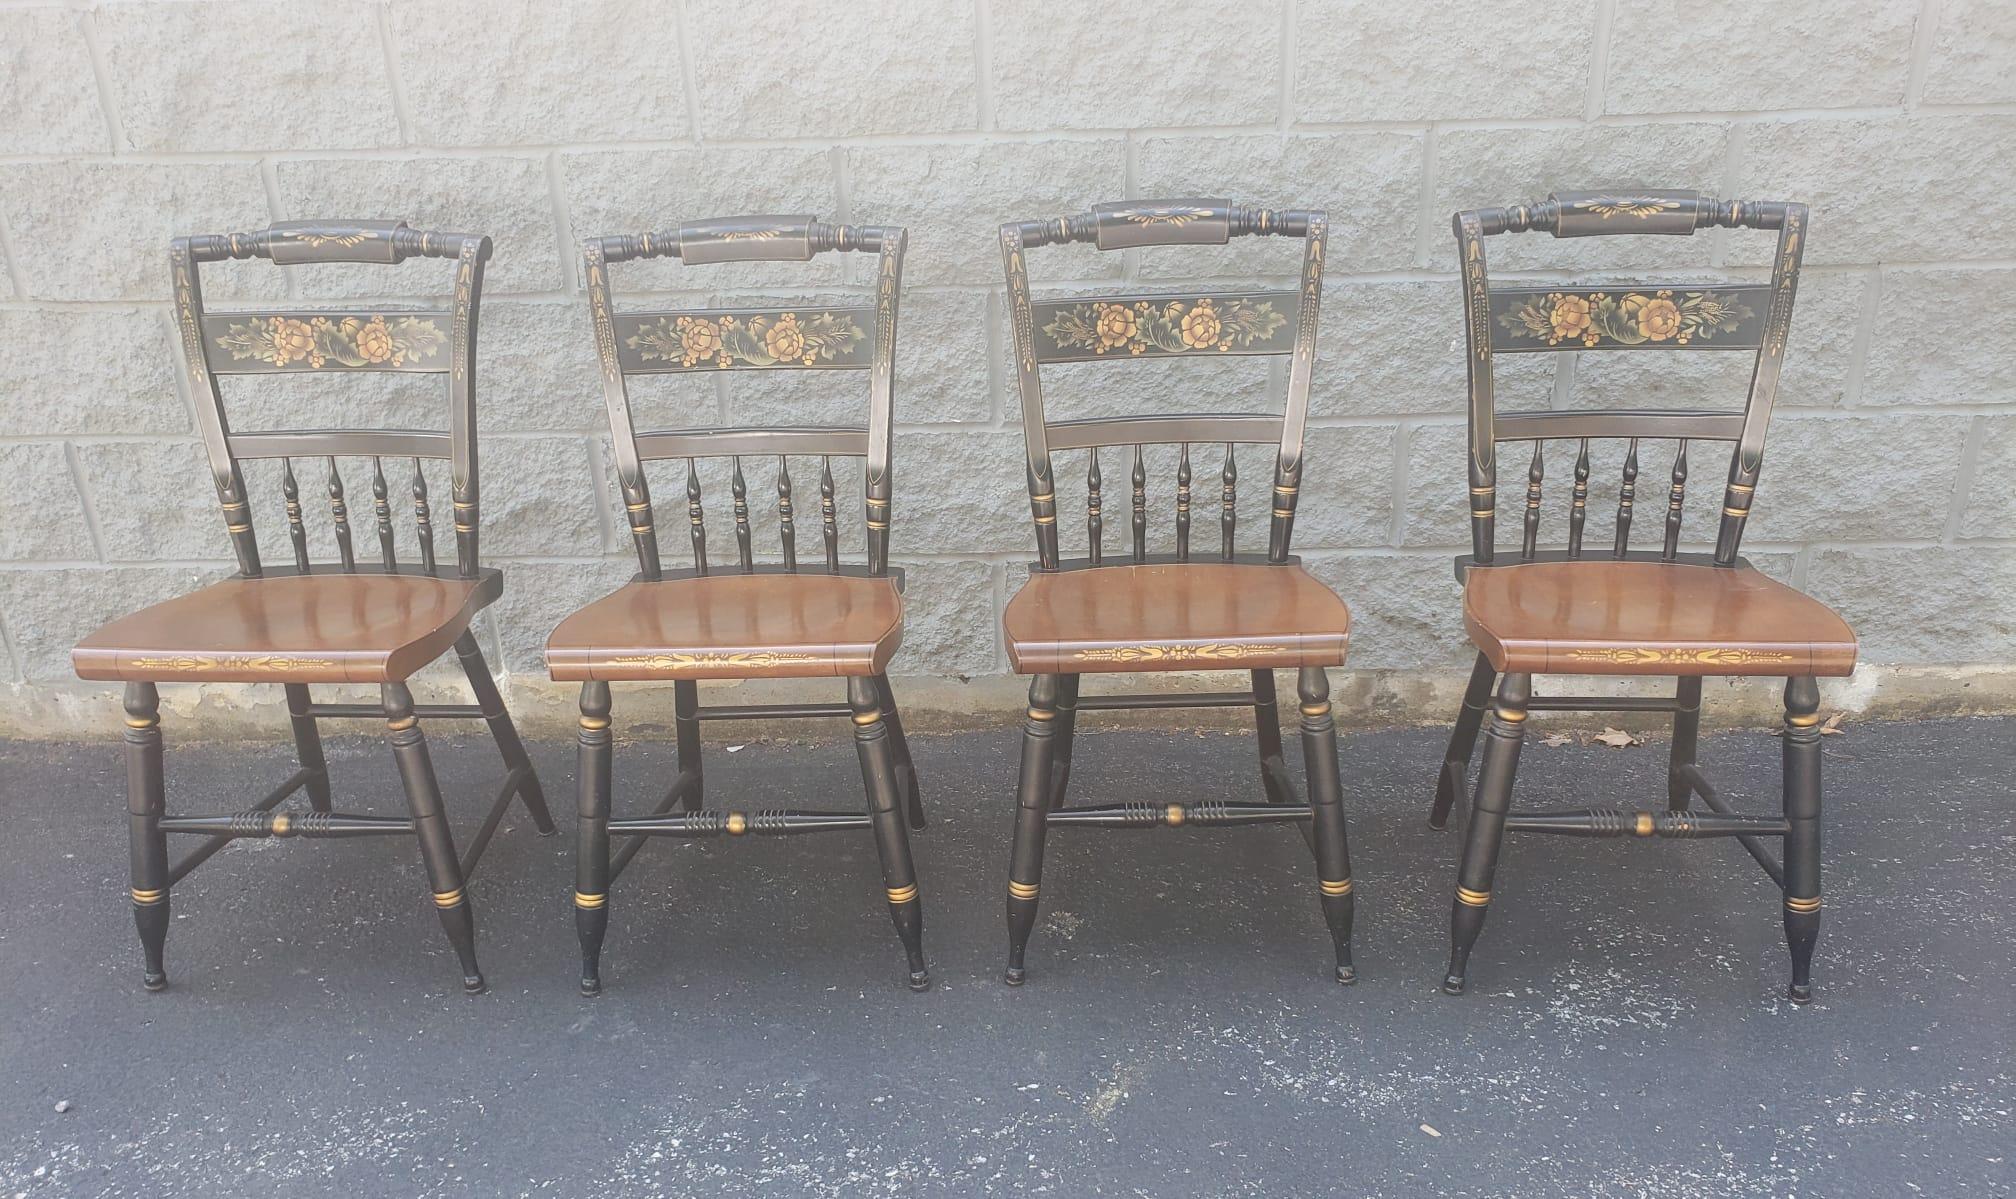 Beautiful  Set of 4 Lambert Hitchcock Ebonized and Gilt Ornate Maple Dining Chairs.
Measures 16